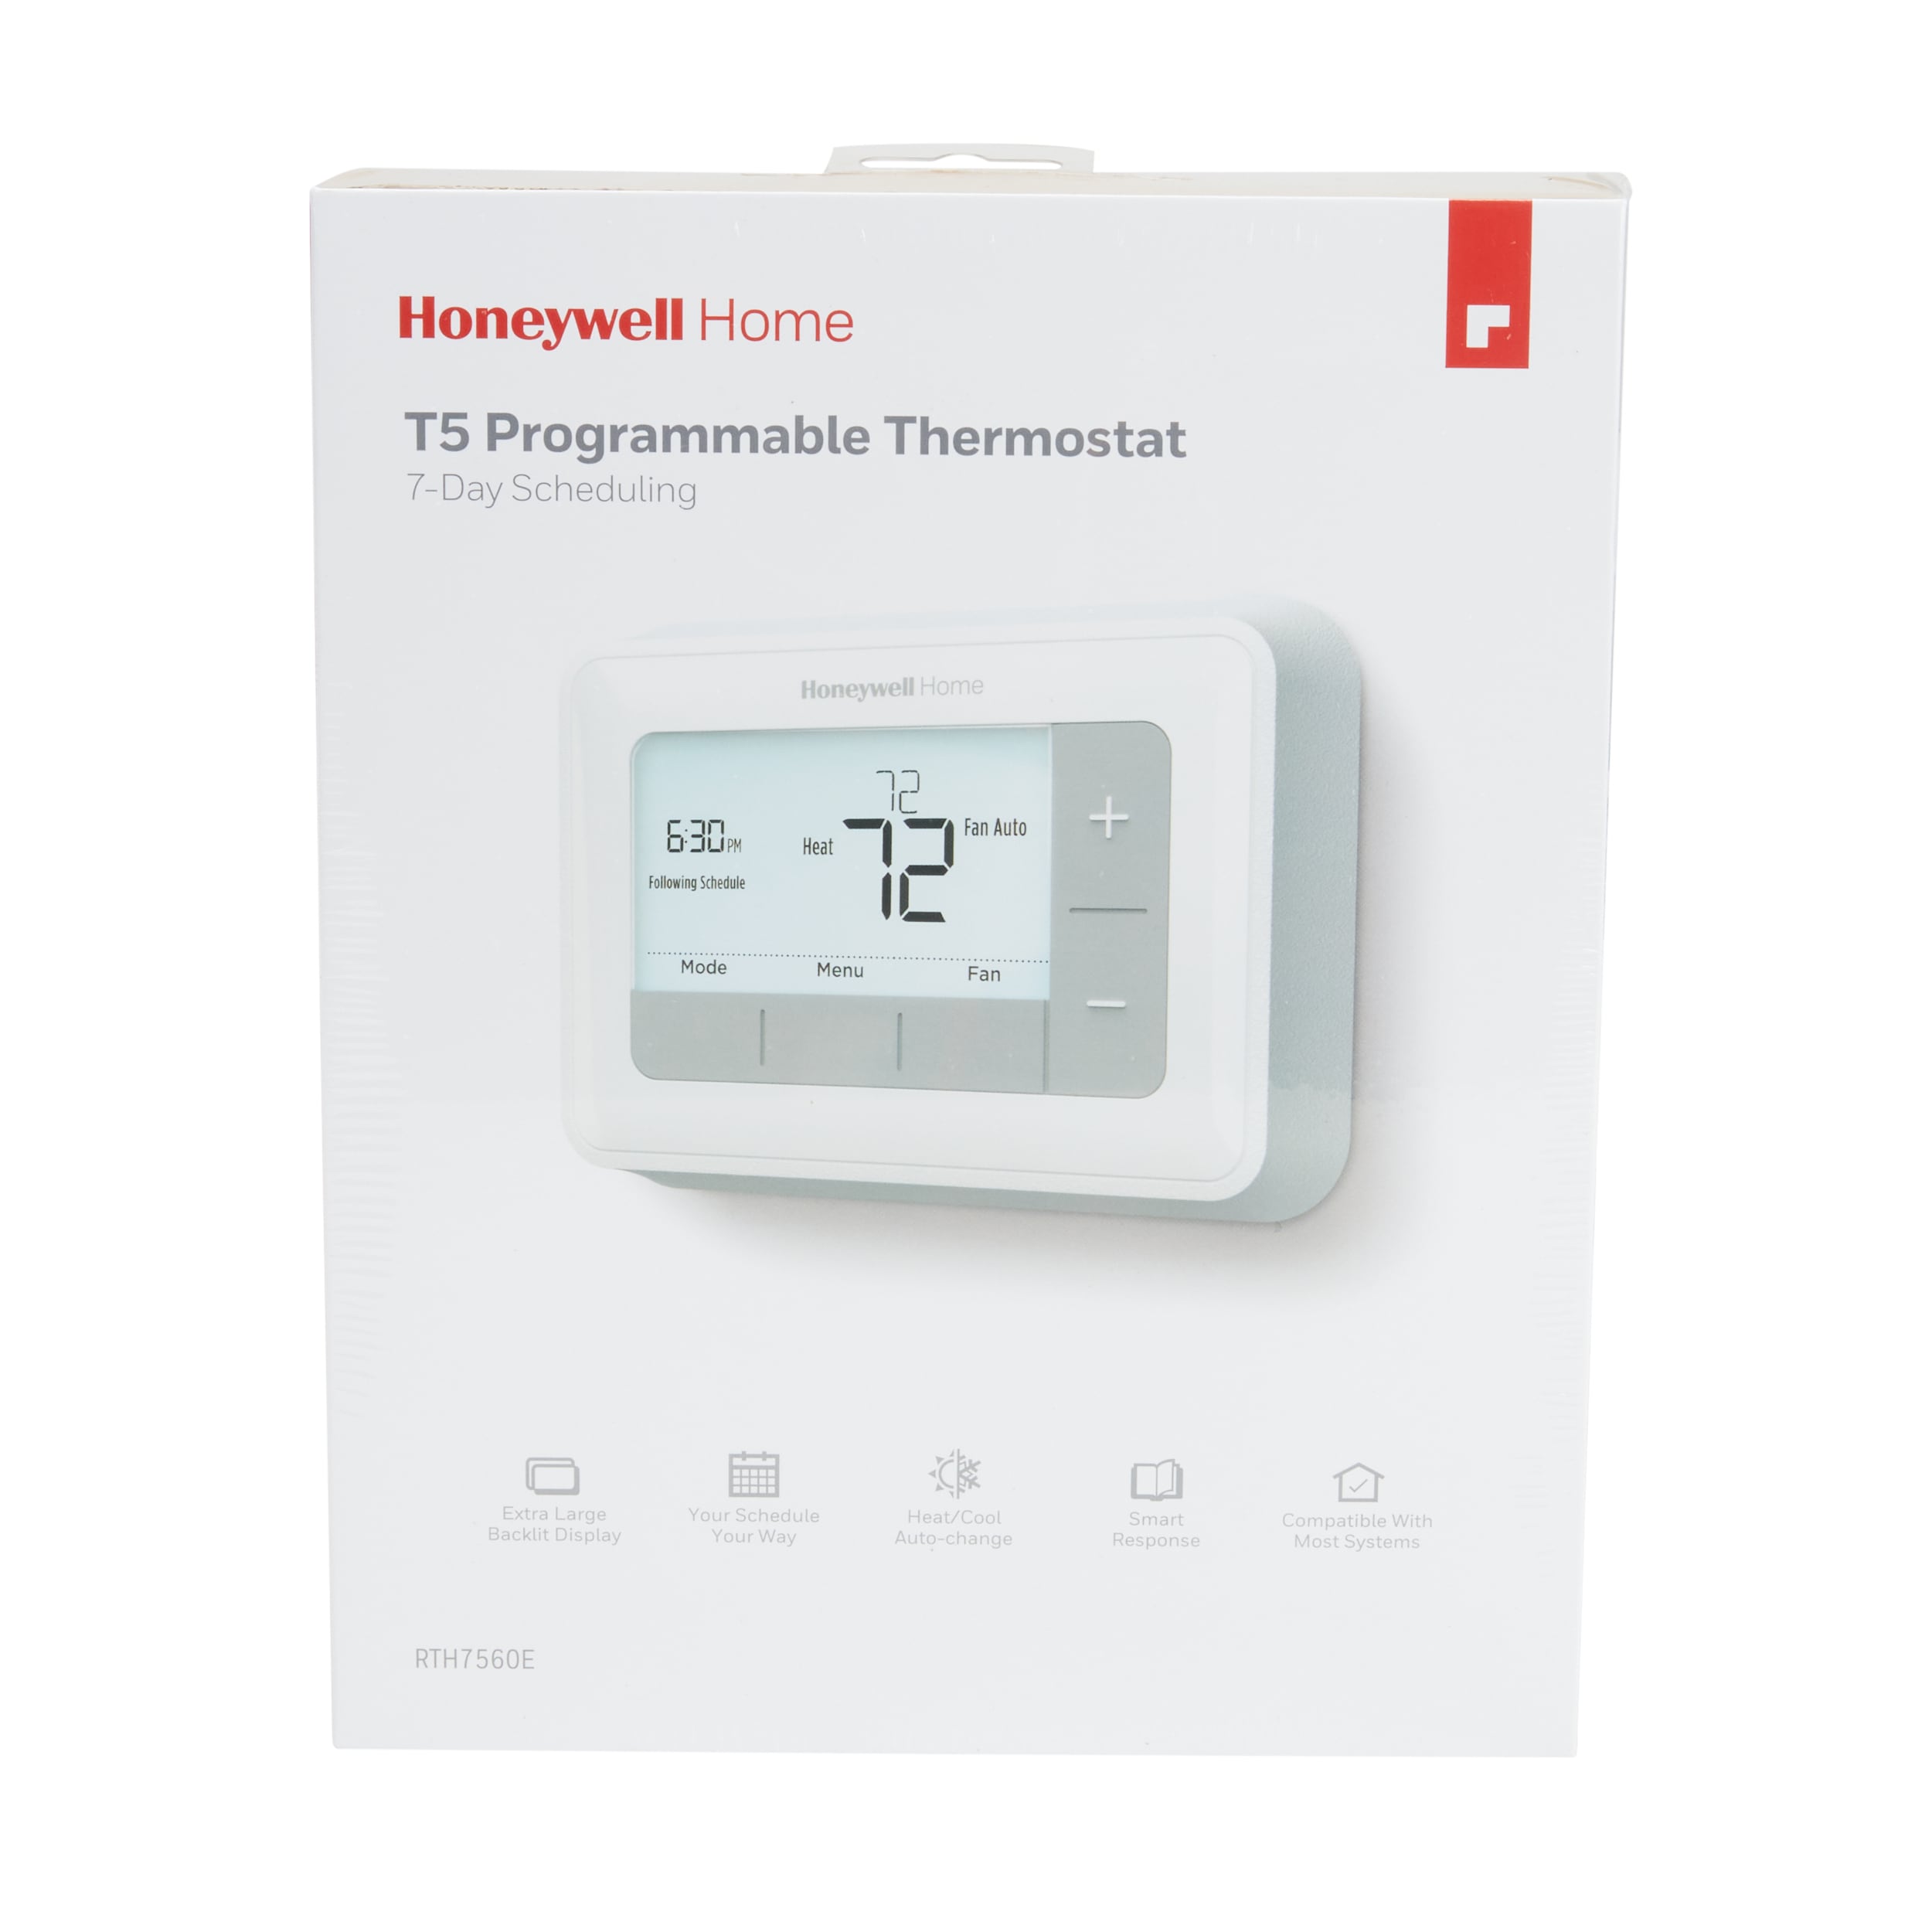 Honeywell Premium extra large Screen Selectable-flexible Touch